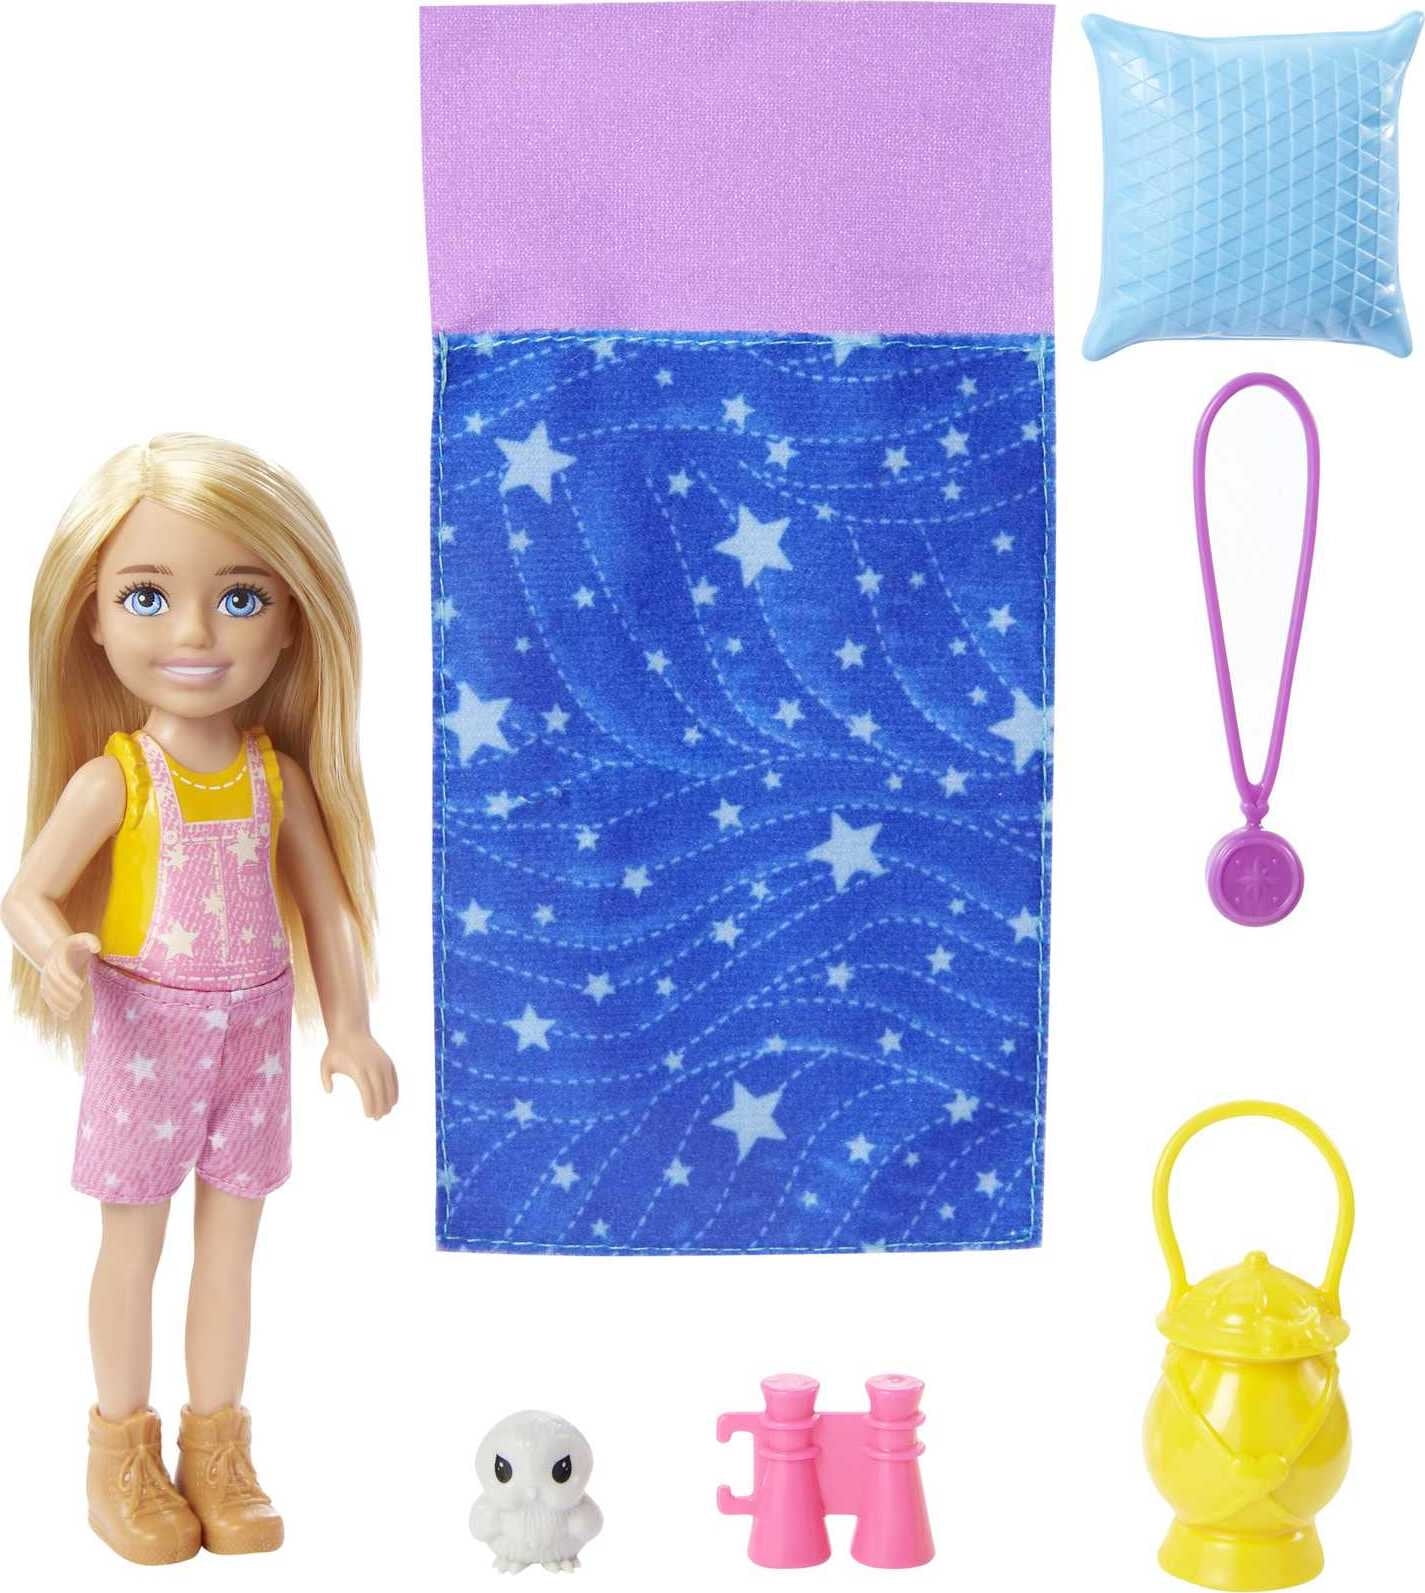 Barbie It Takes Two Chelsea Camping Doll with Pet Owl & Accessories, 3 to 7 Year Olds